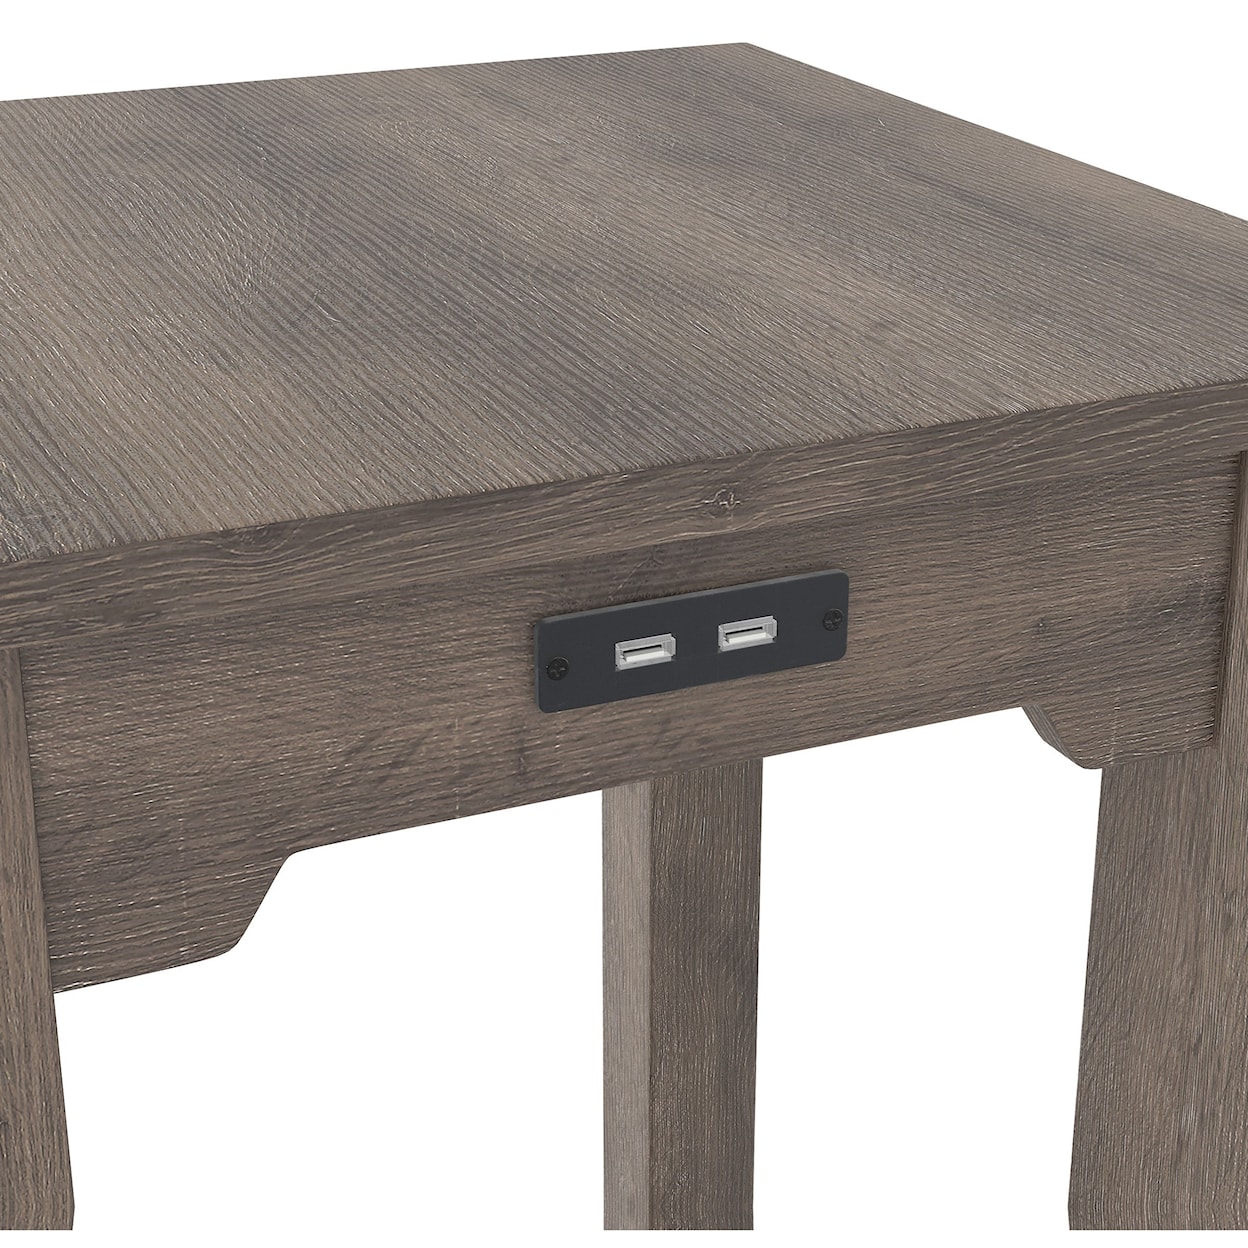 Signature Design by Ashley Furniture Arlenbry Chairside End Table